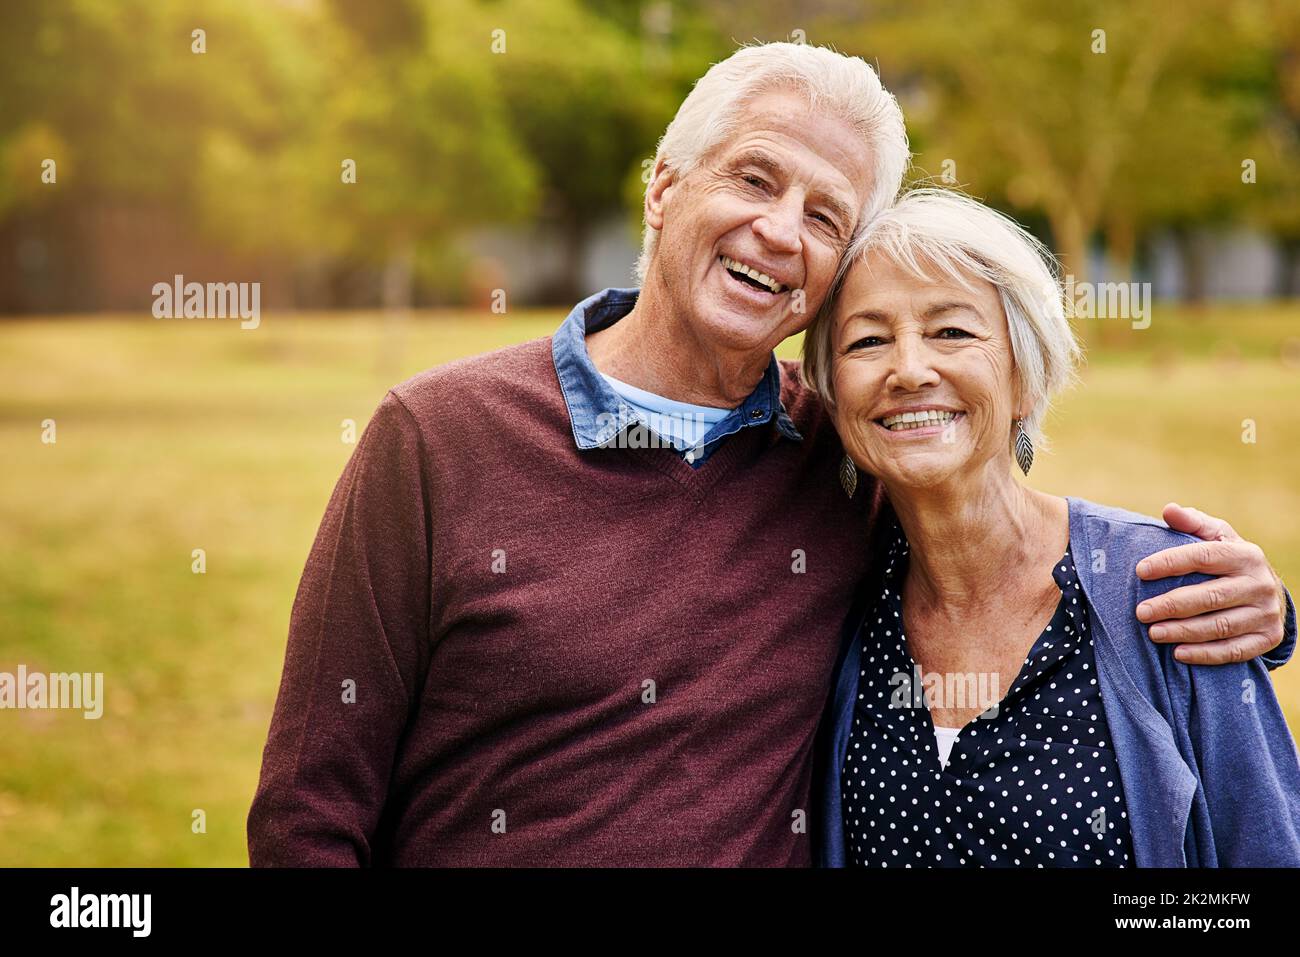 True love never grows old. Portrait of a happy senior couple in the park. Stock Photo